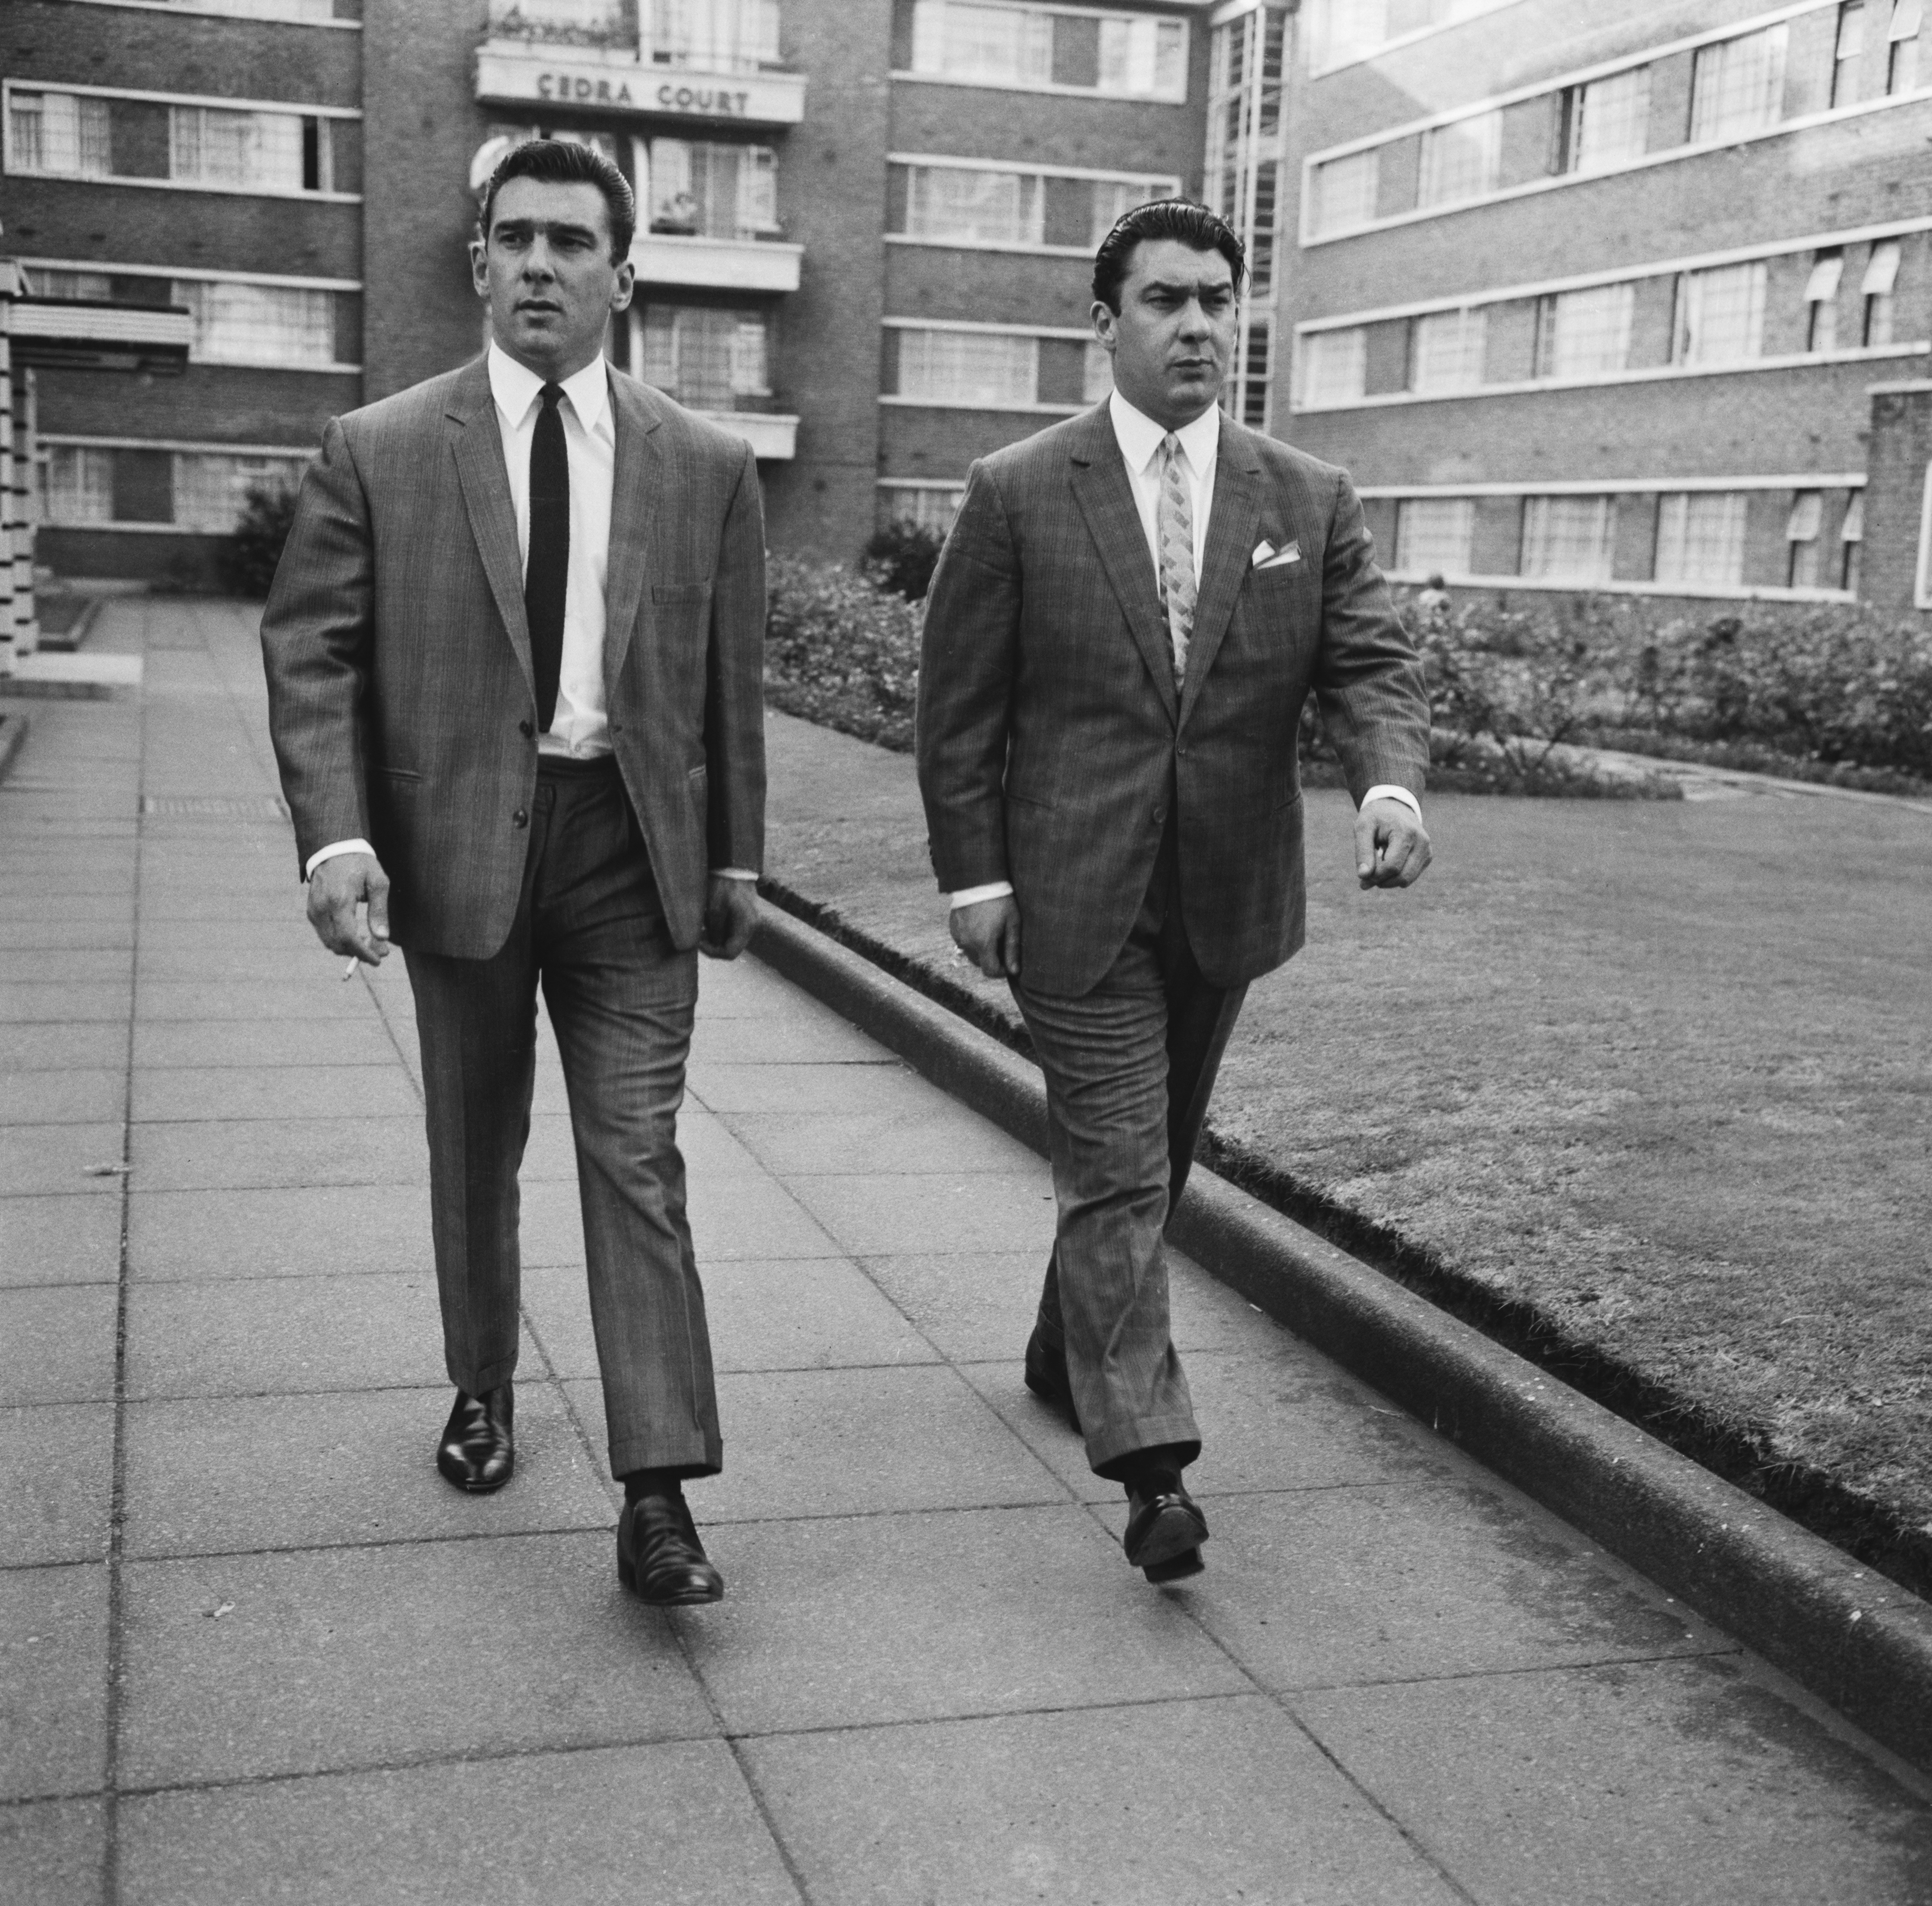 Feared gangsters Ronnie and Reggie Kray in London in 1964 qhiddritdiqxkinv